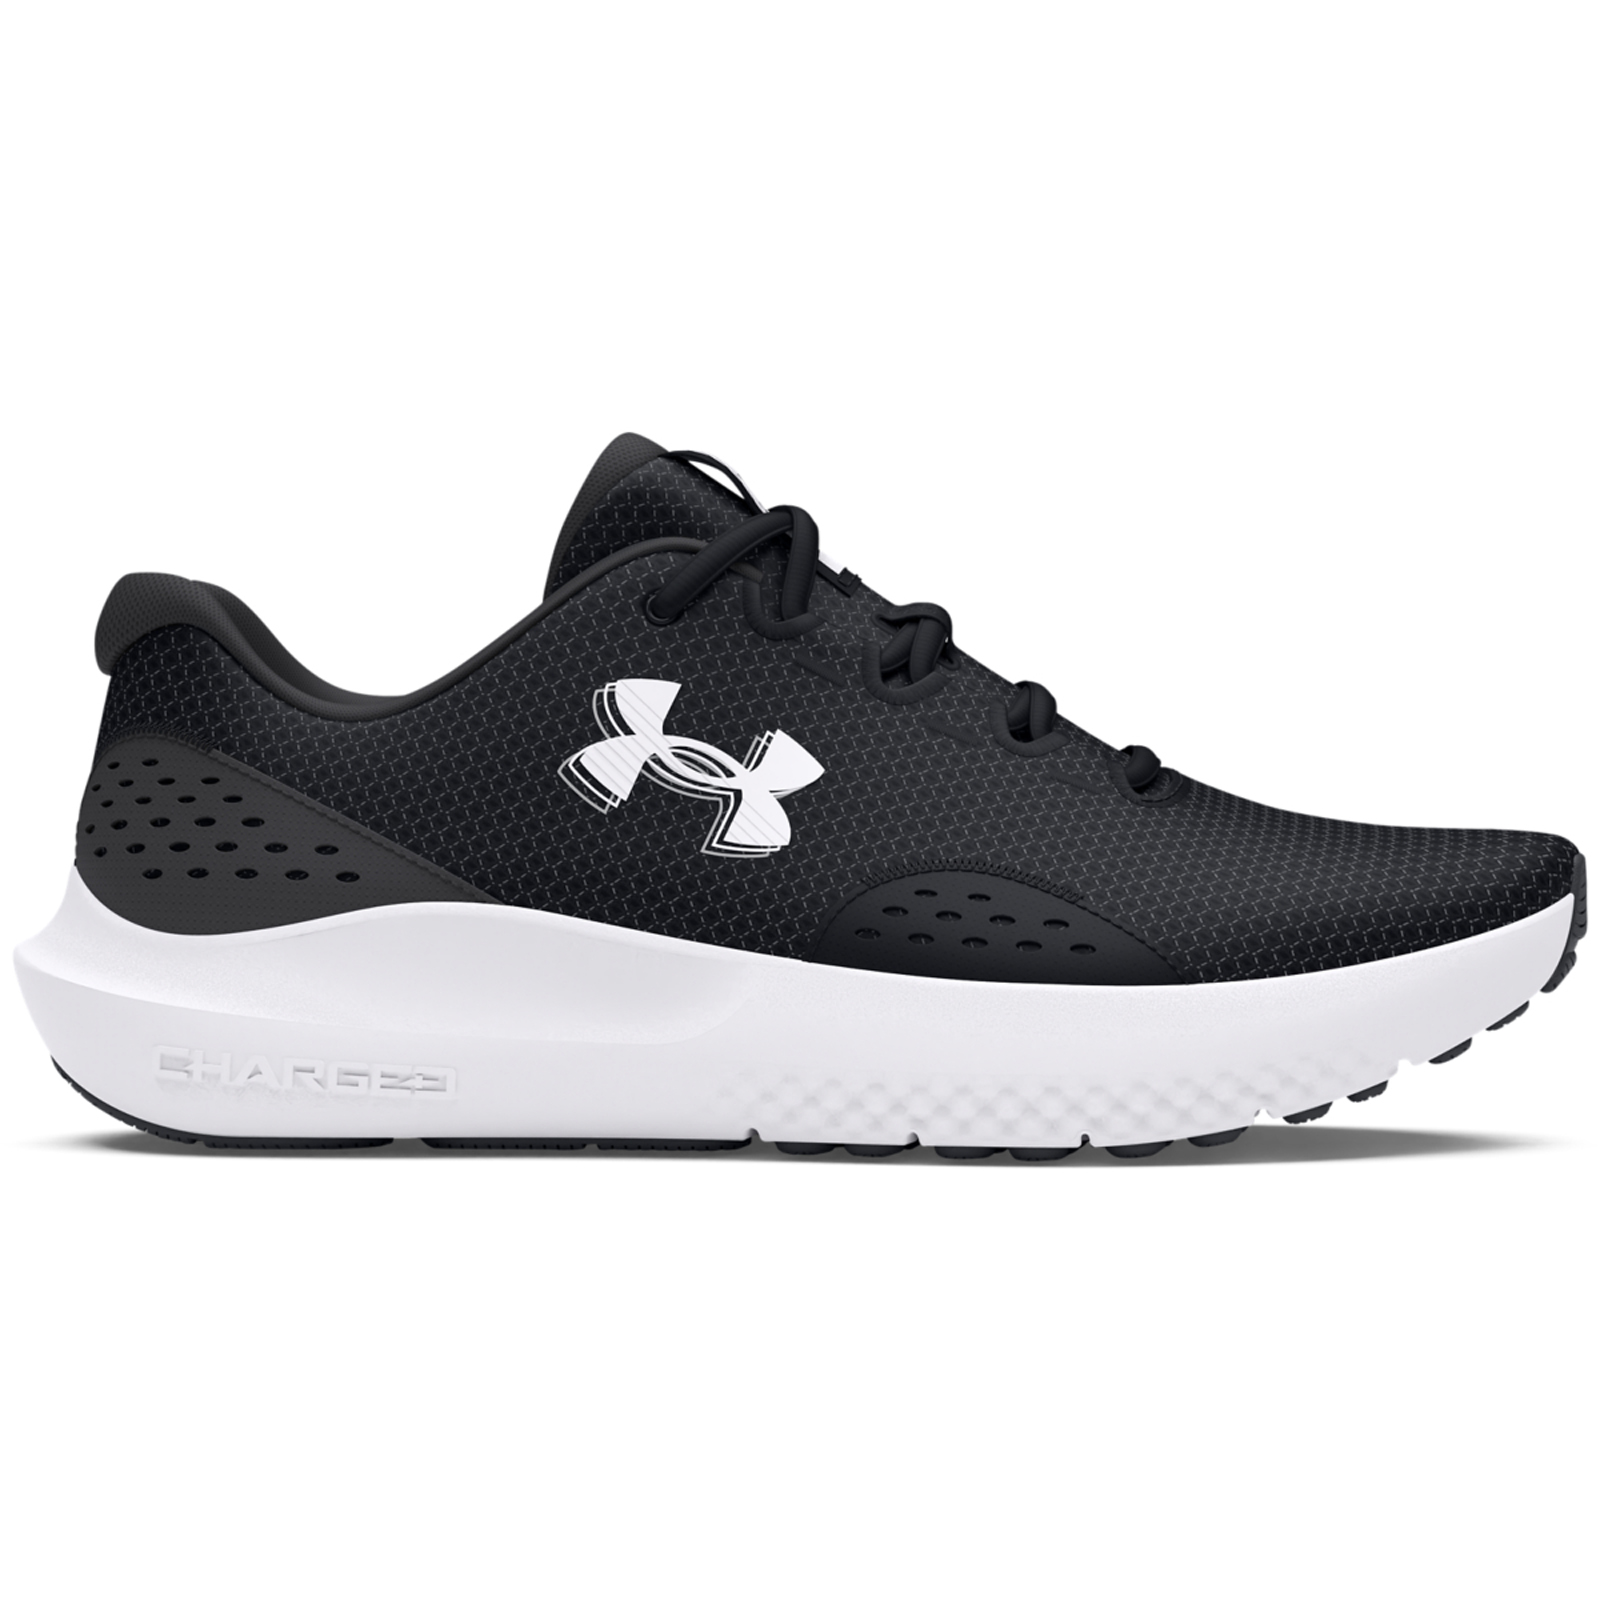 Under Armour - 3027000 UA CHARGED SURGE 4 - Black/Anthracite/White Ανδρικά > Παπούτσια > Αθλητικά > Παπούτσι Low Cut